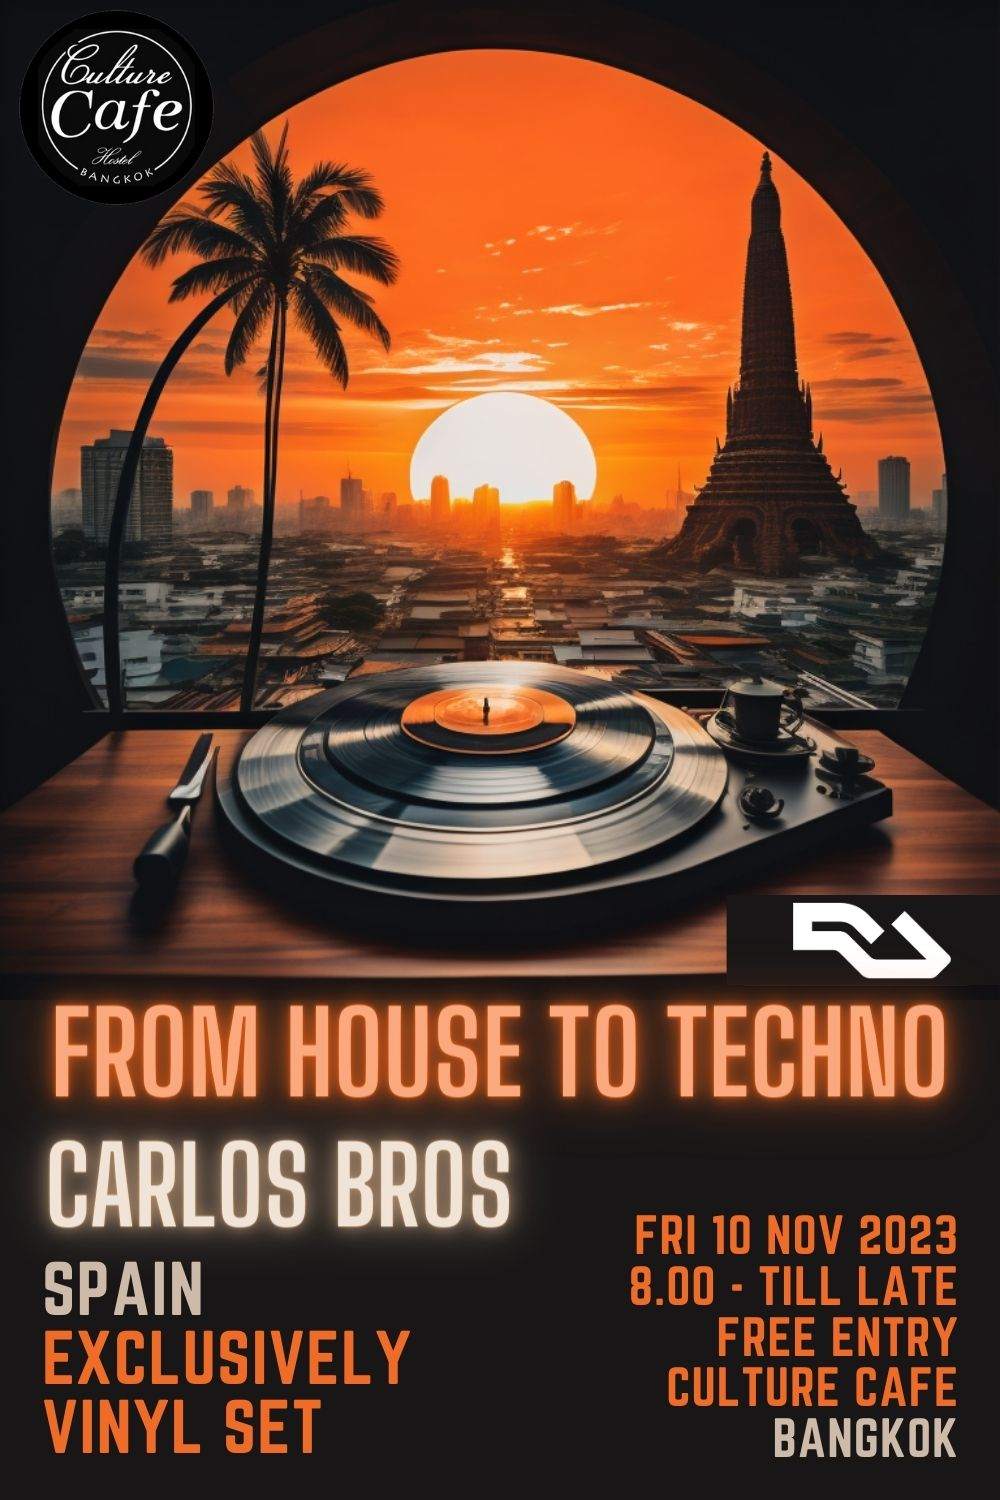 'From House to Techno': Carlos Bros/Spain, Exclusively Vinyl Set - フライヤー表